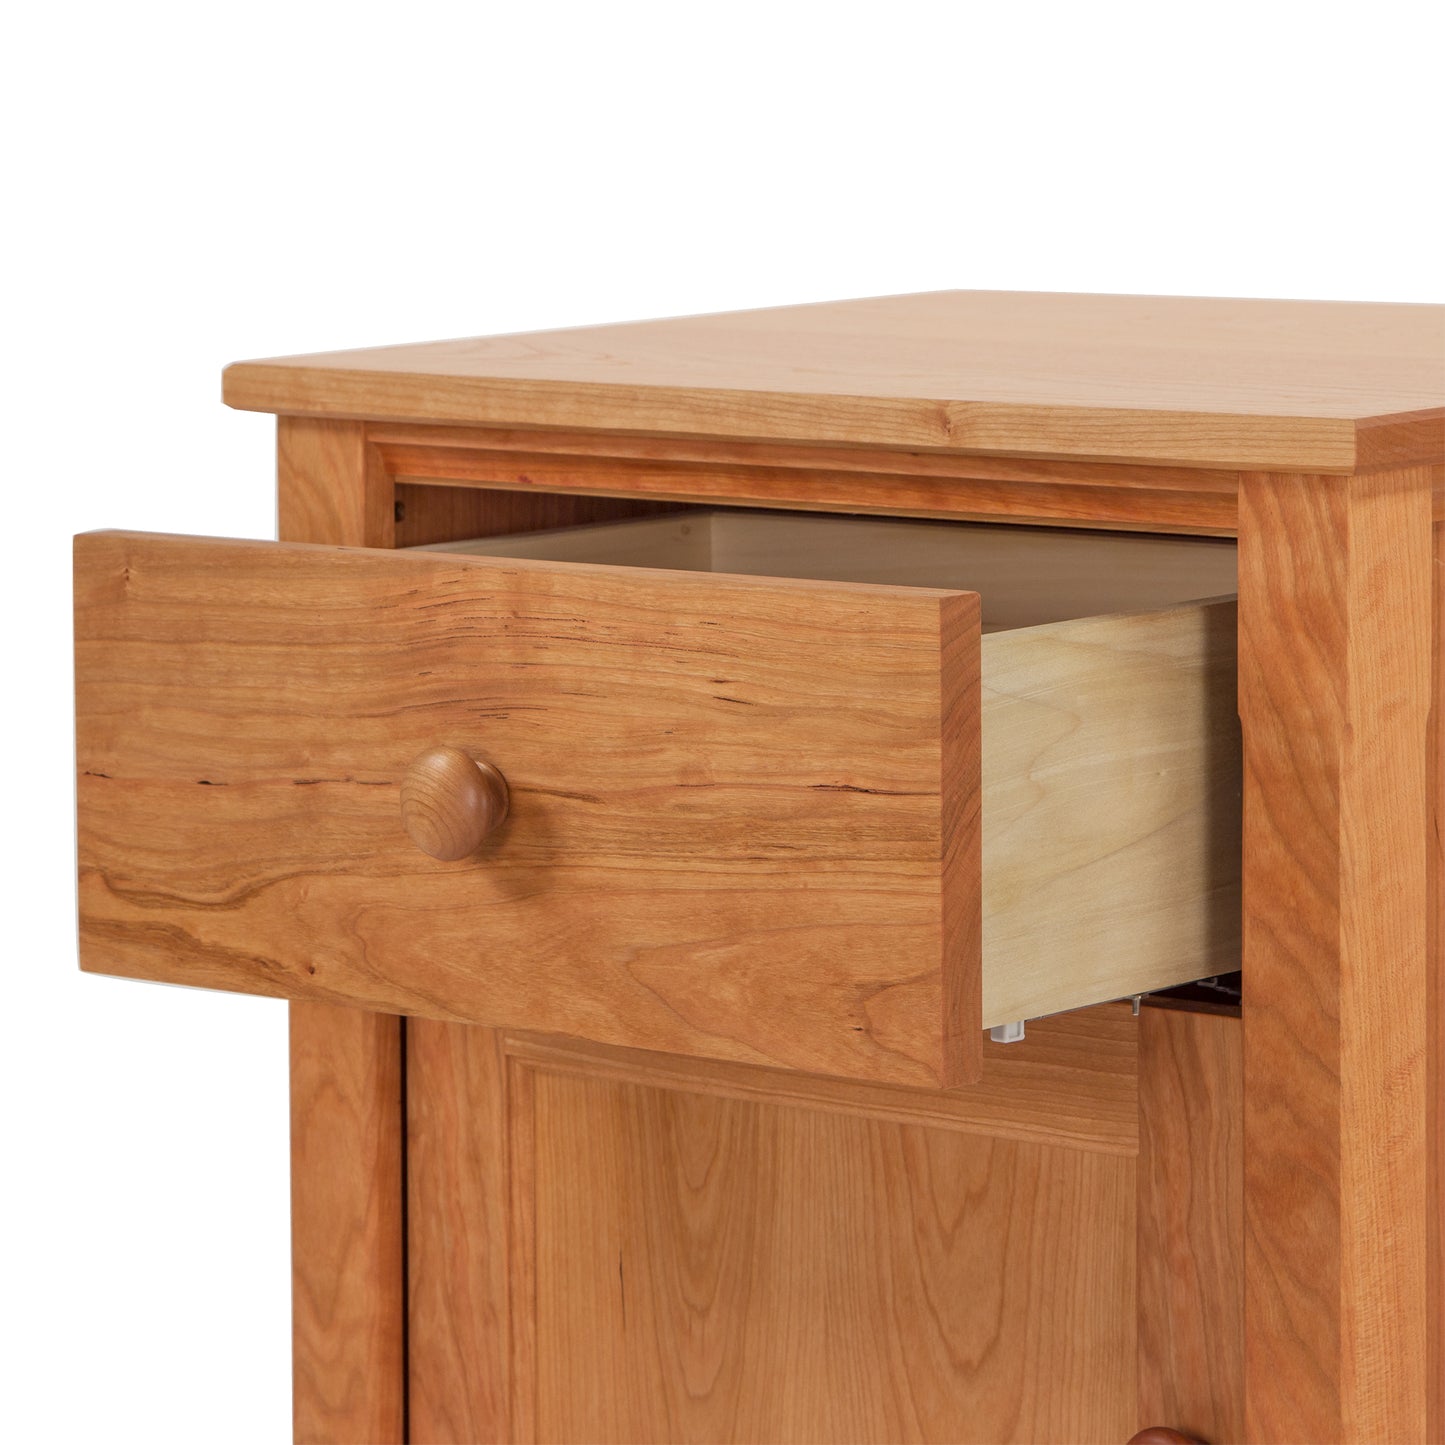 A Vermont Shaker 1-Drawer Nightstand with Door from Maple Corner Woodworks, crafted from eco-friendly materials and featuring a partially opened drawer revealing its light-colored interior, highlighting the natural wood grain and a simple round knob.